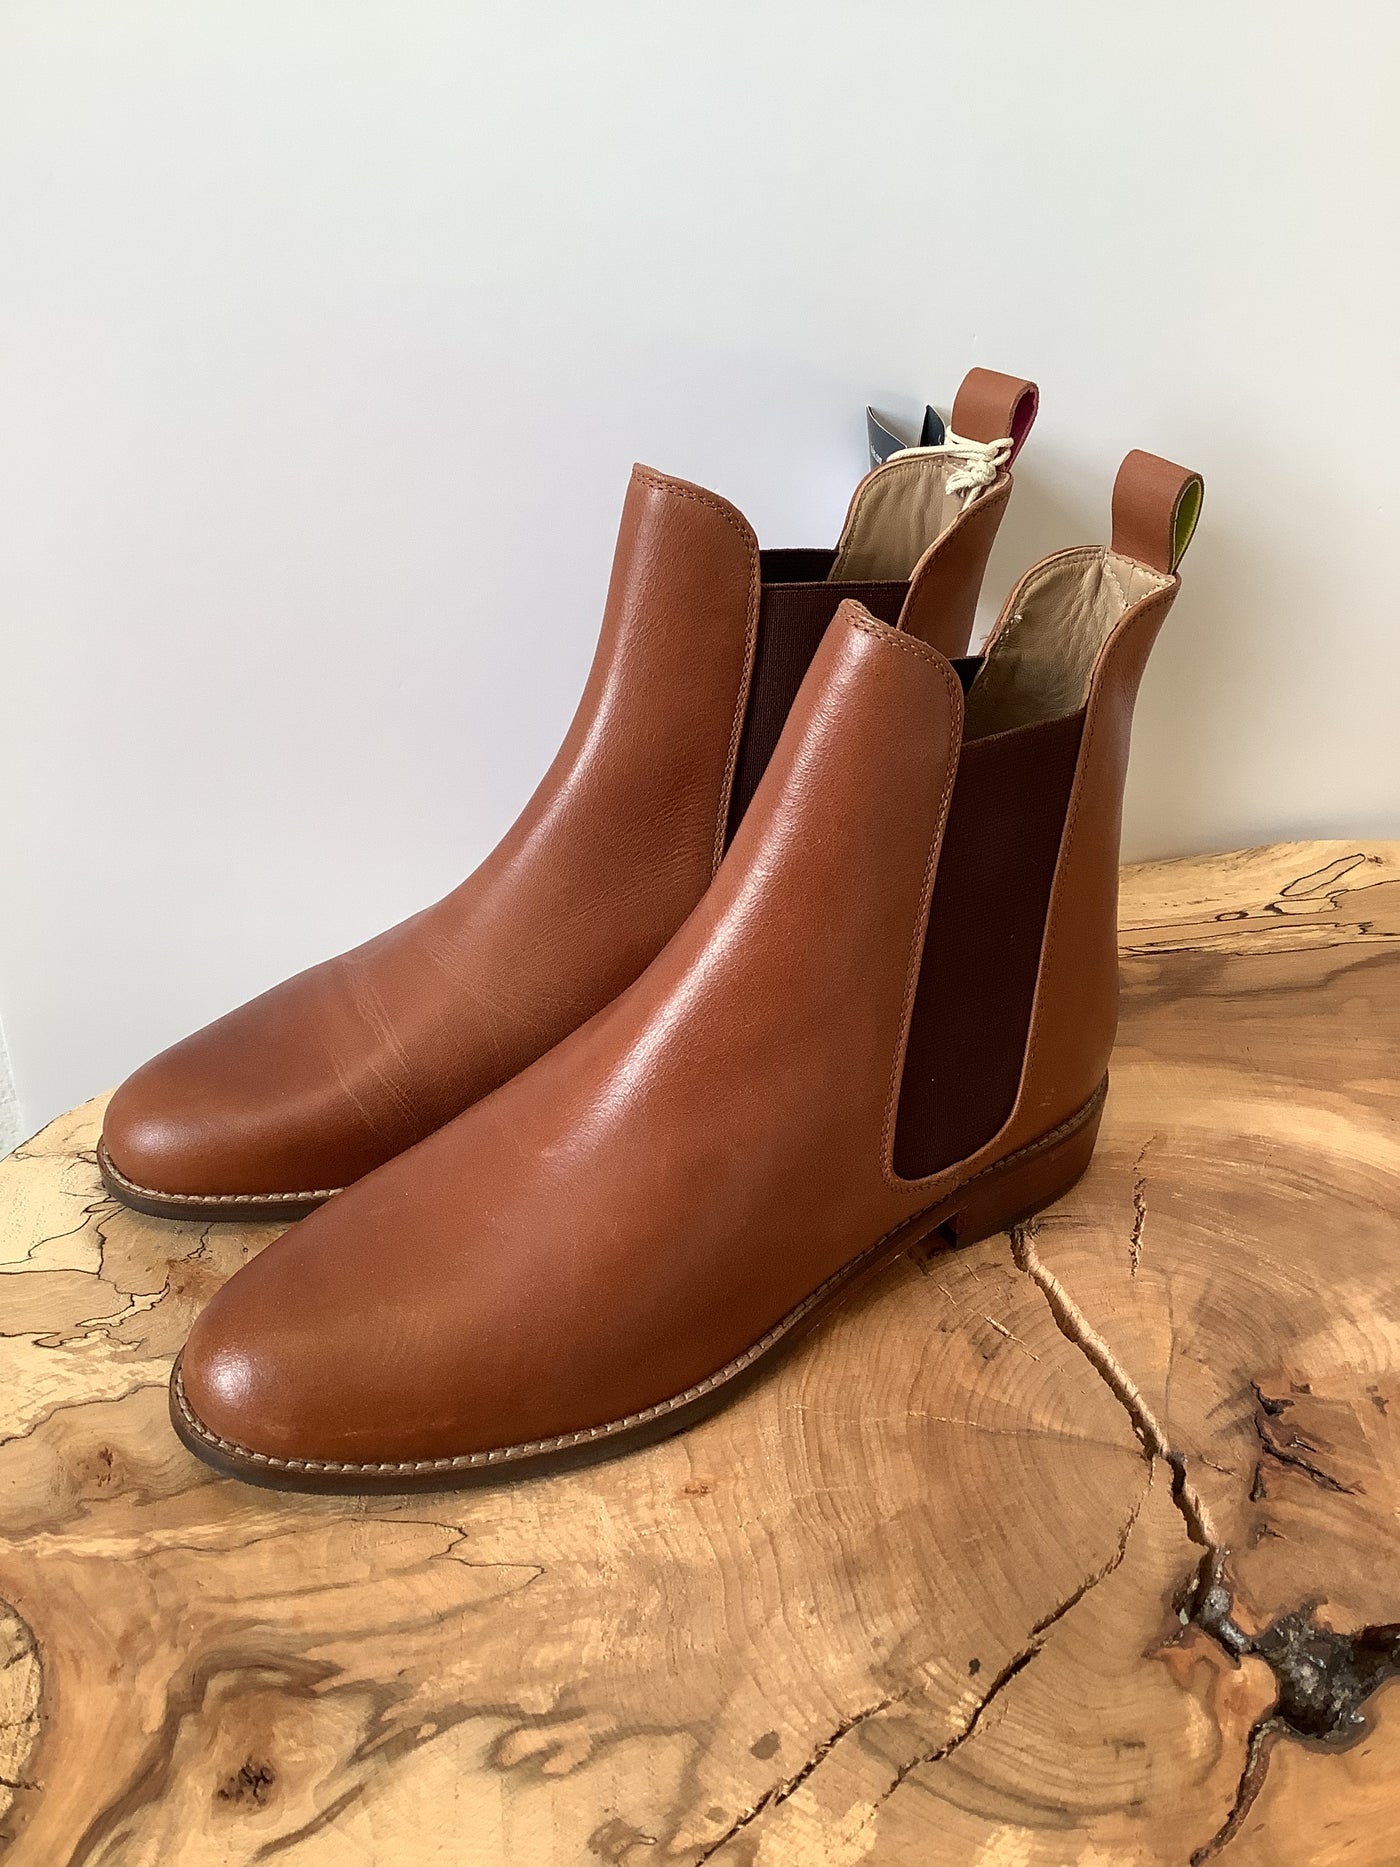 Joules Tan Chelsea Boots 7 New RRP £140